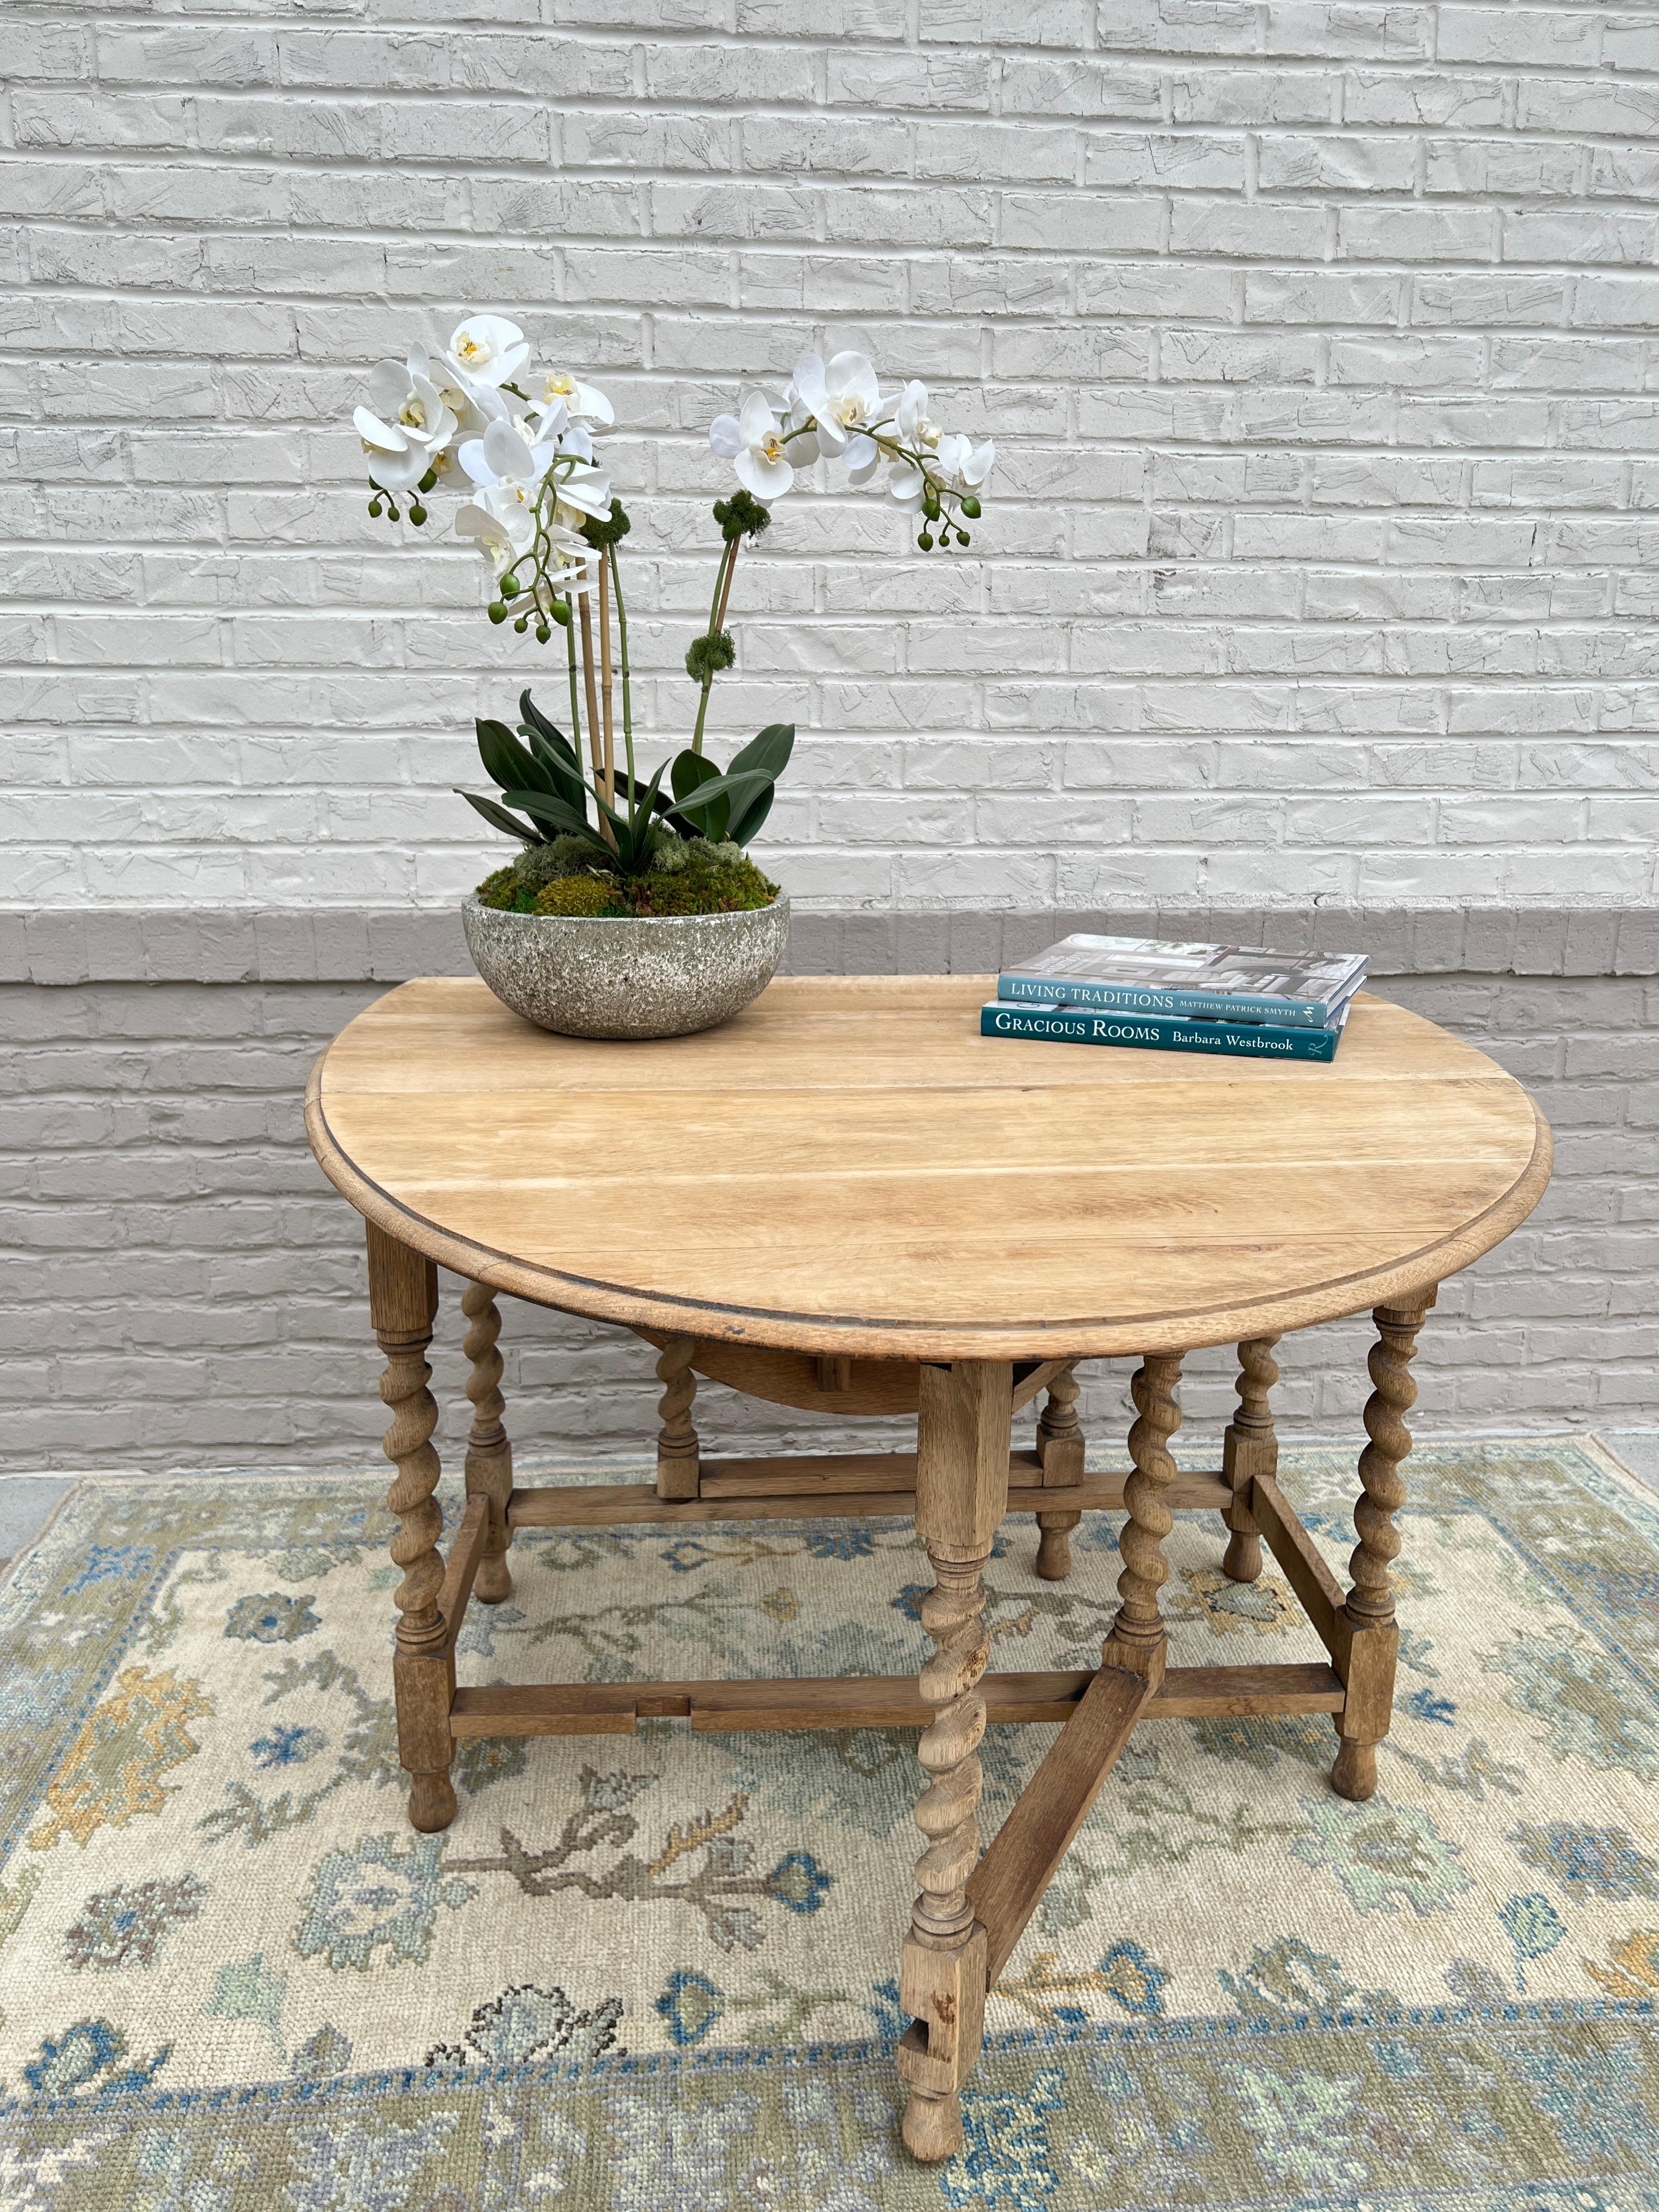 circa 1920s England. 
A gorgeous bleach oak folding gateleg table, filled with old-world charm. The carved details and turned table legs highlight its beauty. The sides of the circular table fold down, allowing it to be easily stored when not in